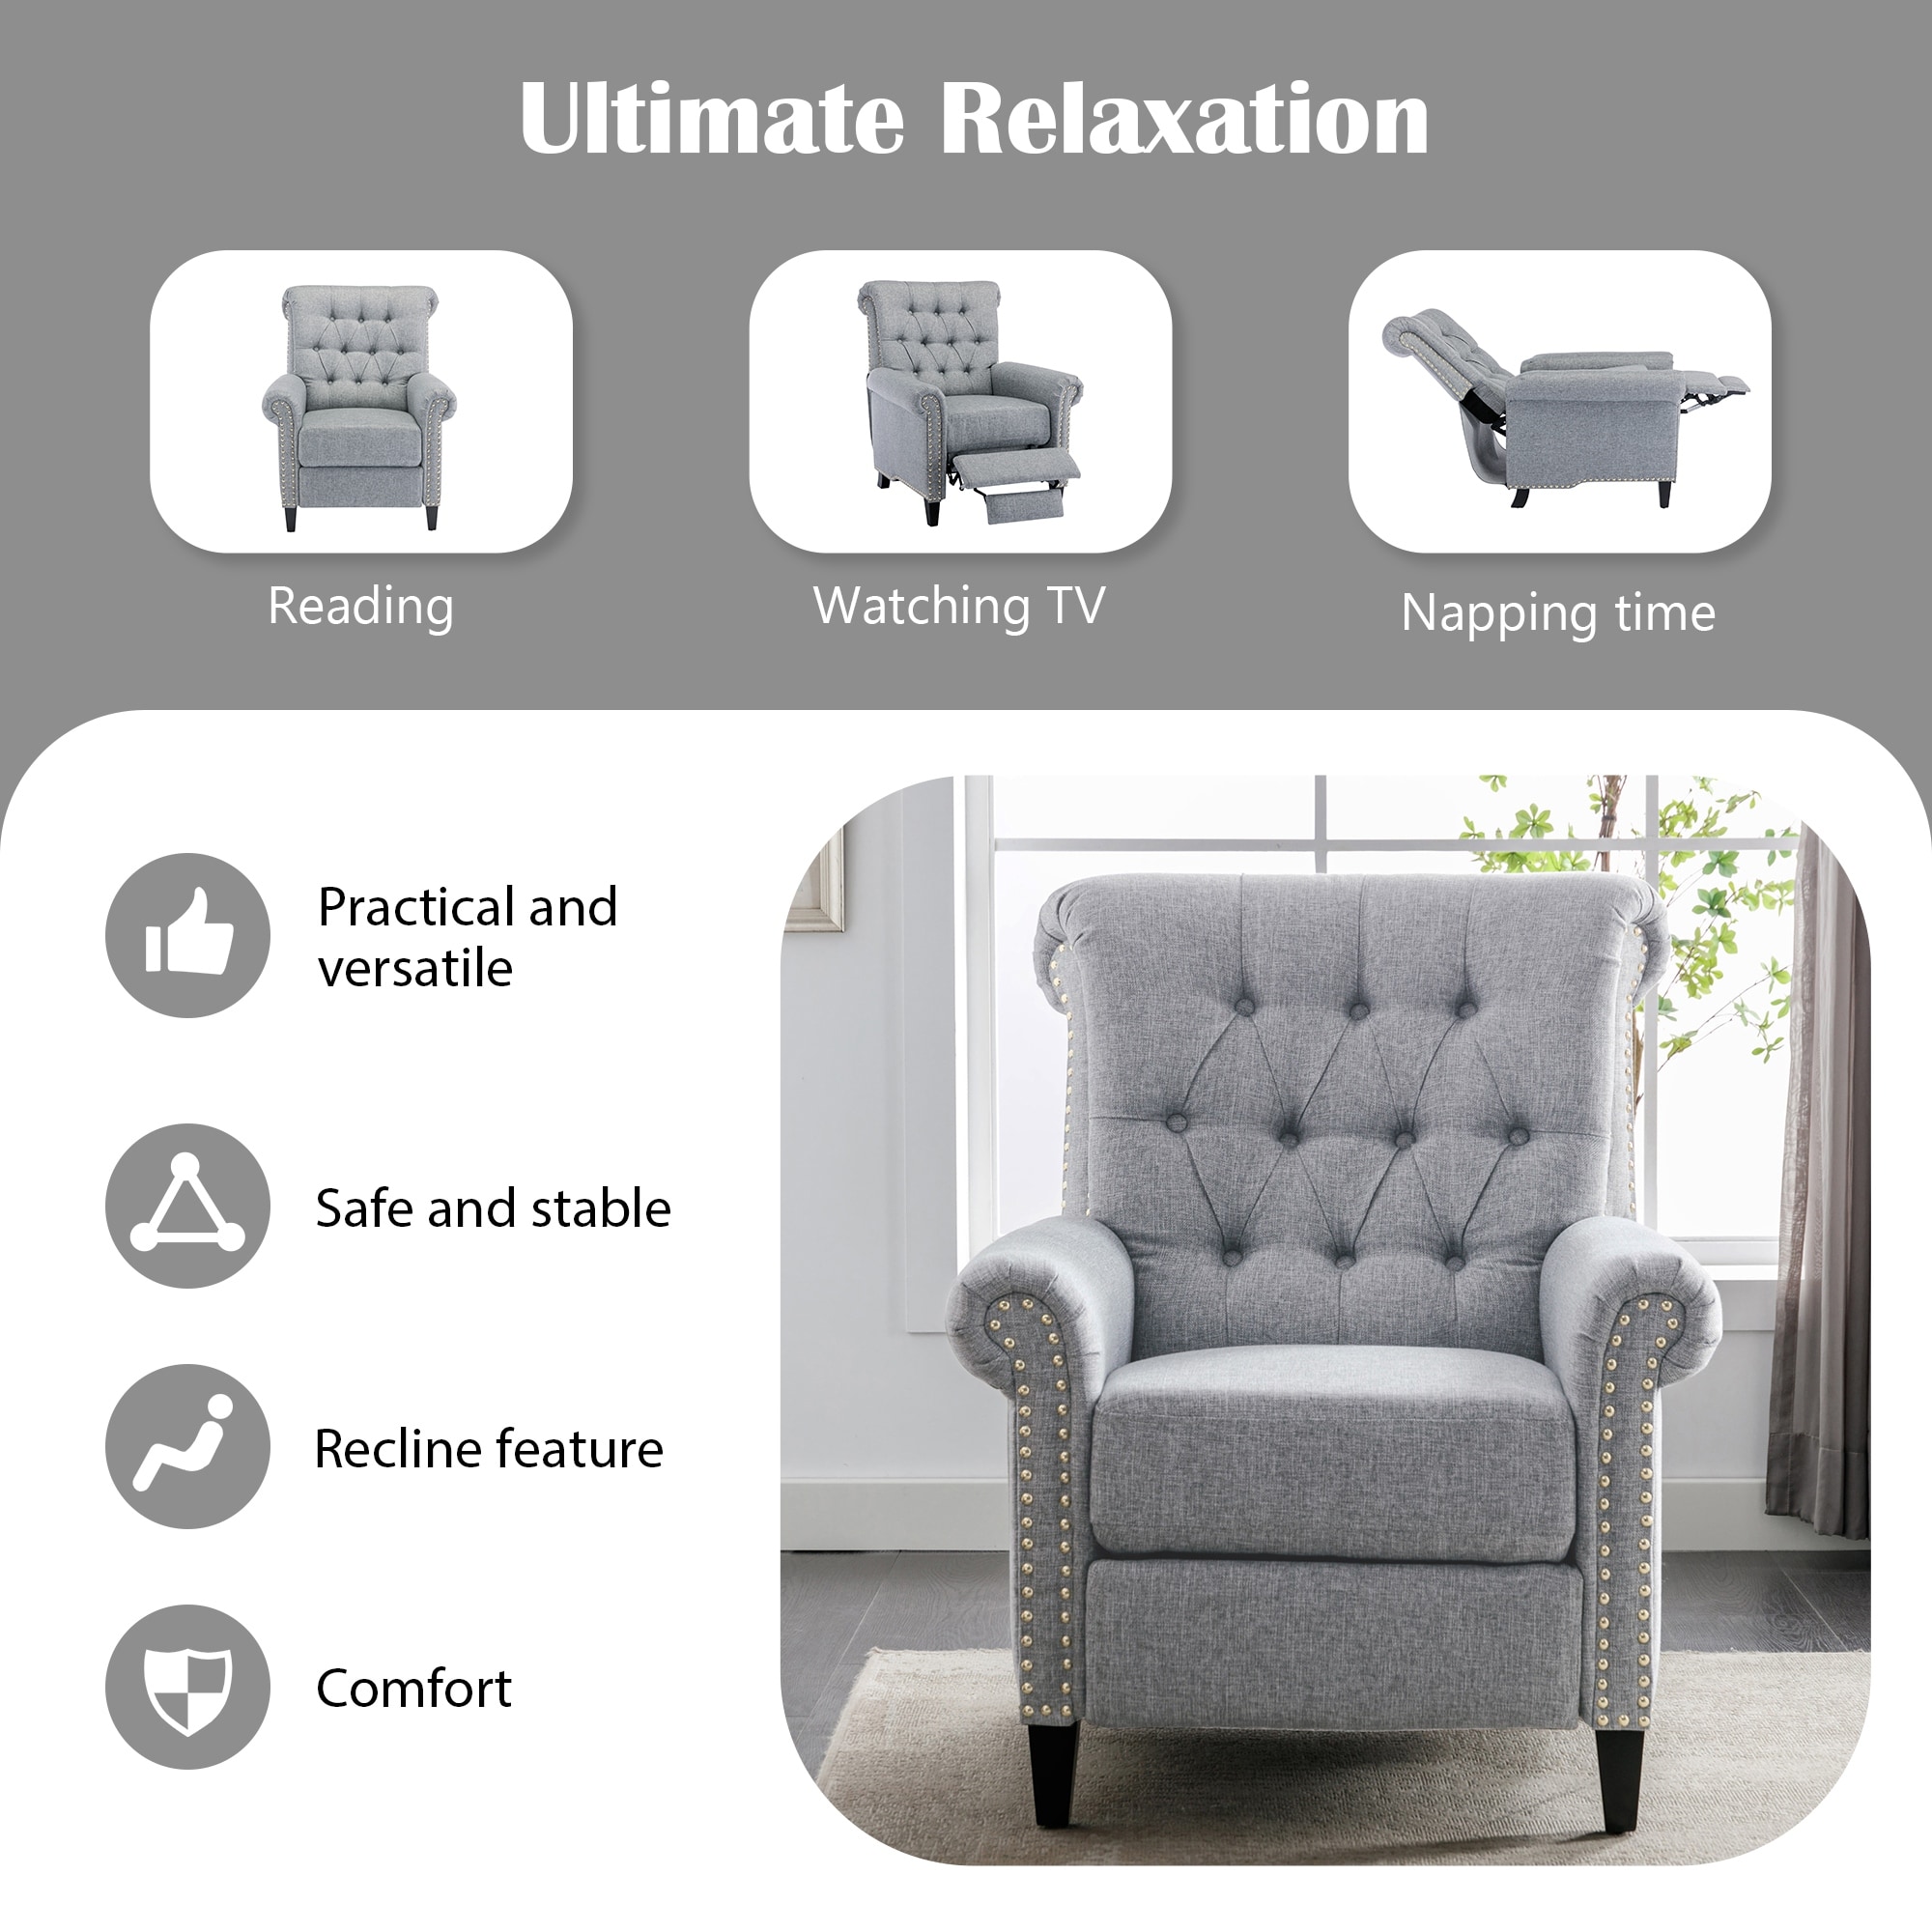 27 Manual Recliner Chair, Wingback Reclining Chair with Padded Seat  Cushion,Single Sofa with Rivets and Solid Wood Legs,Accent Chair Reading  Chair